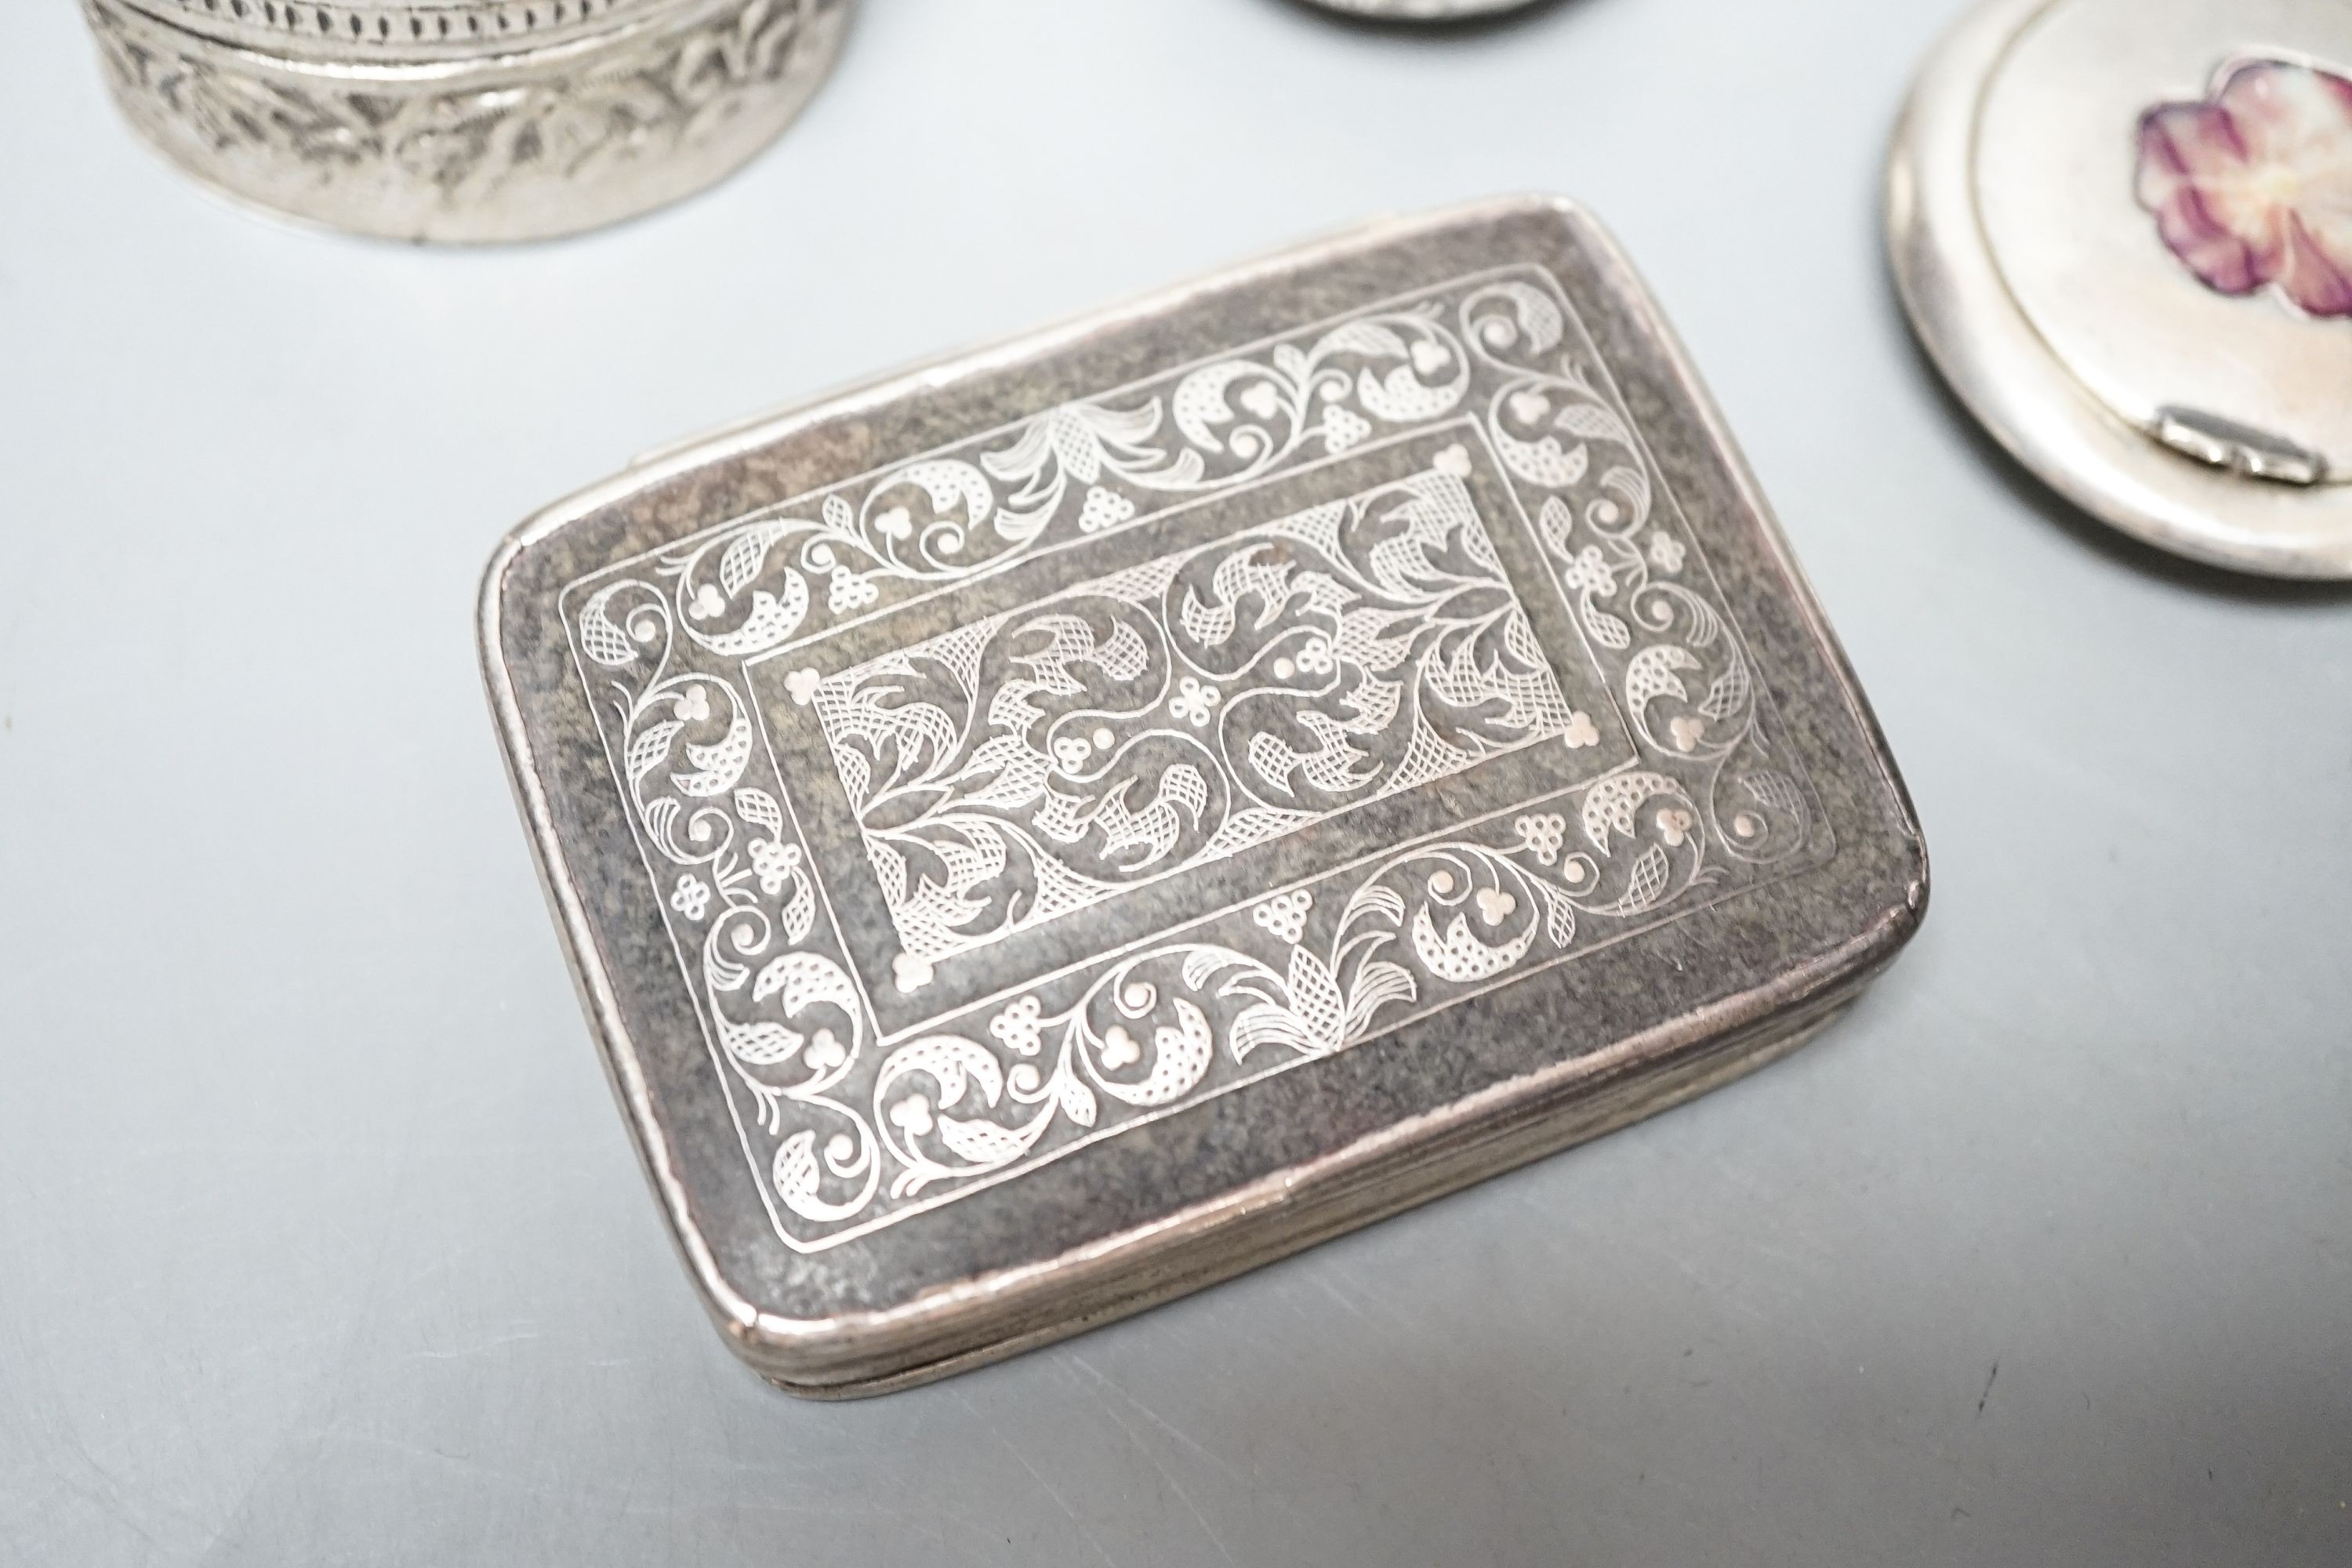 A selection of three small silver or white metal boxes to include a tortoiseshell pique box and a silver and shell inlaid compact.